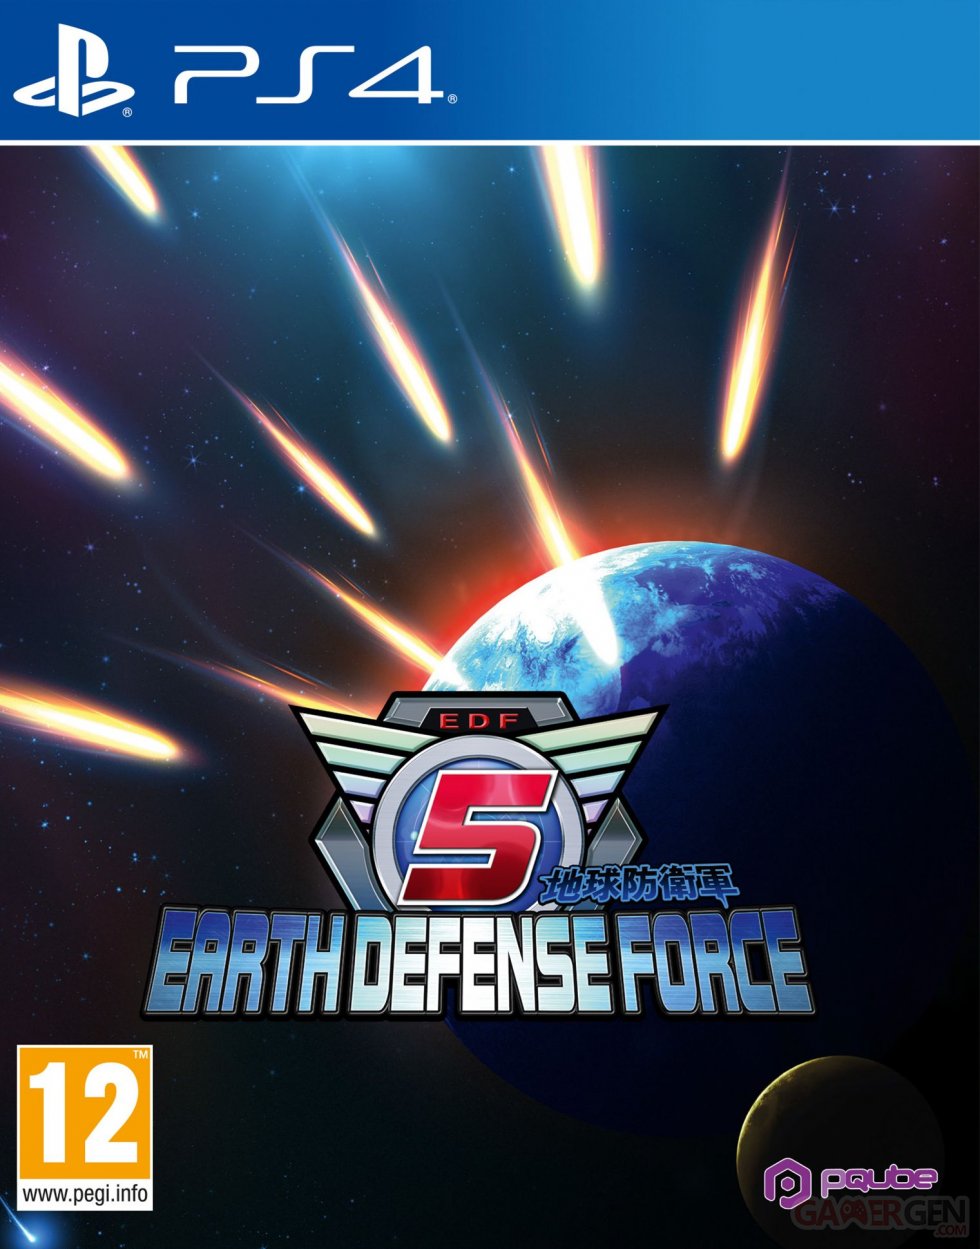 Earth-Defense-Force-5-jaquette-PS4-07-08-2020